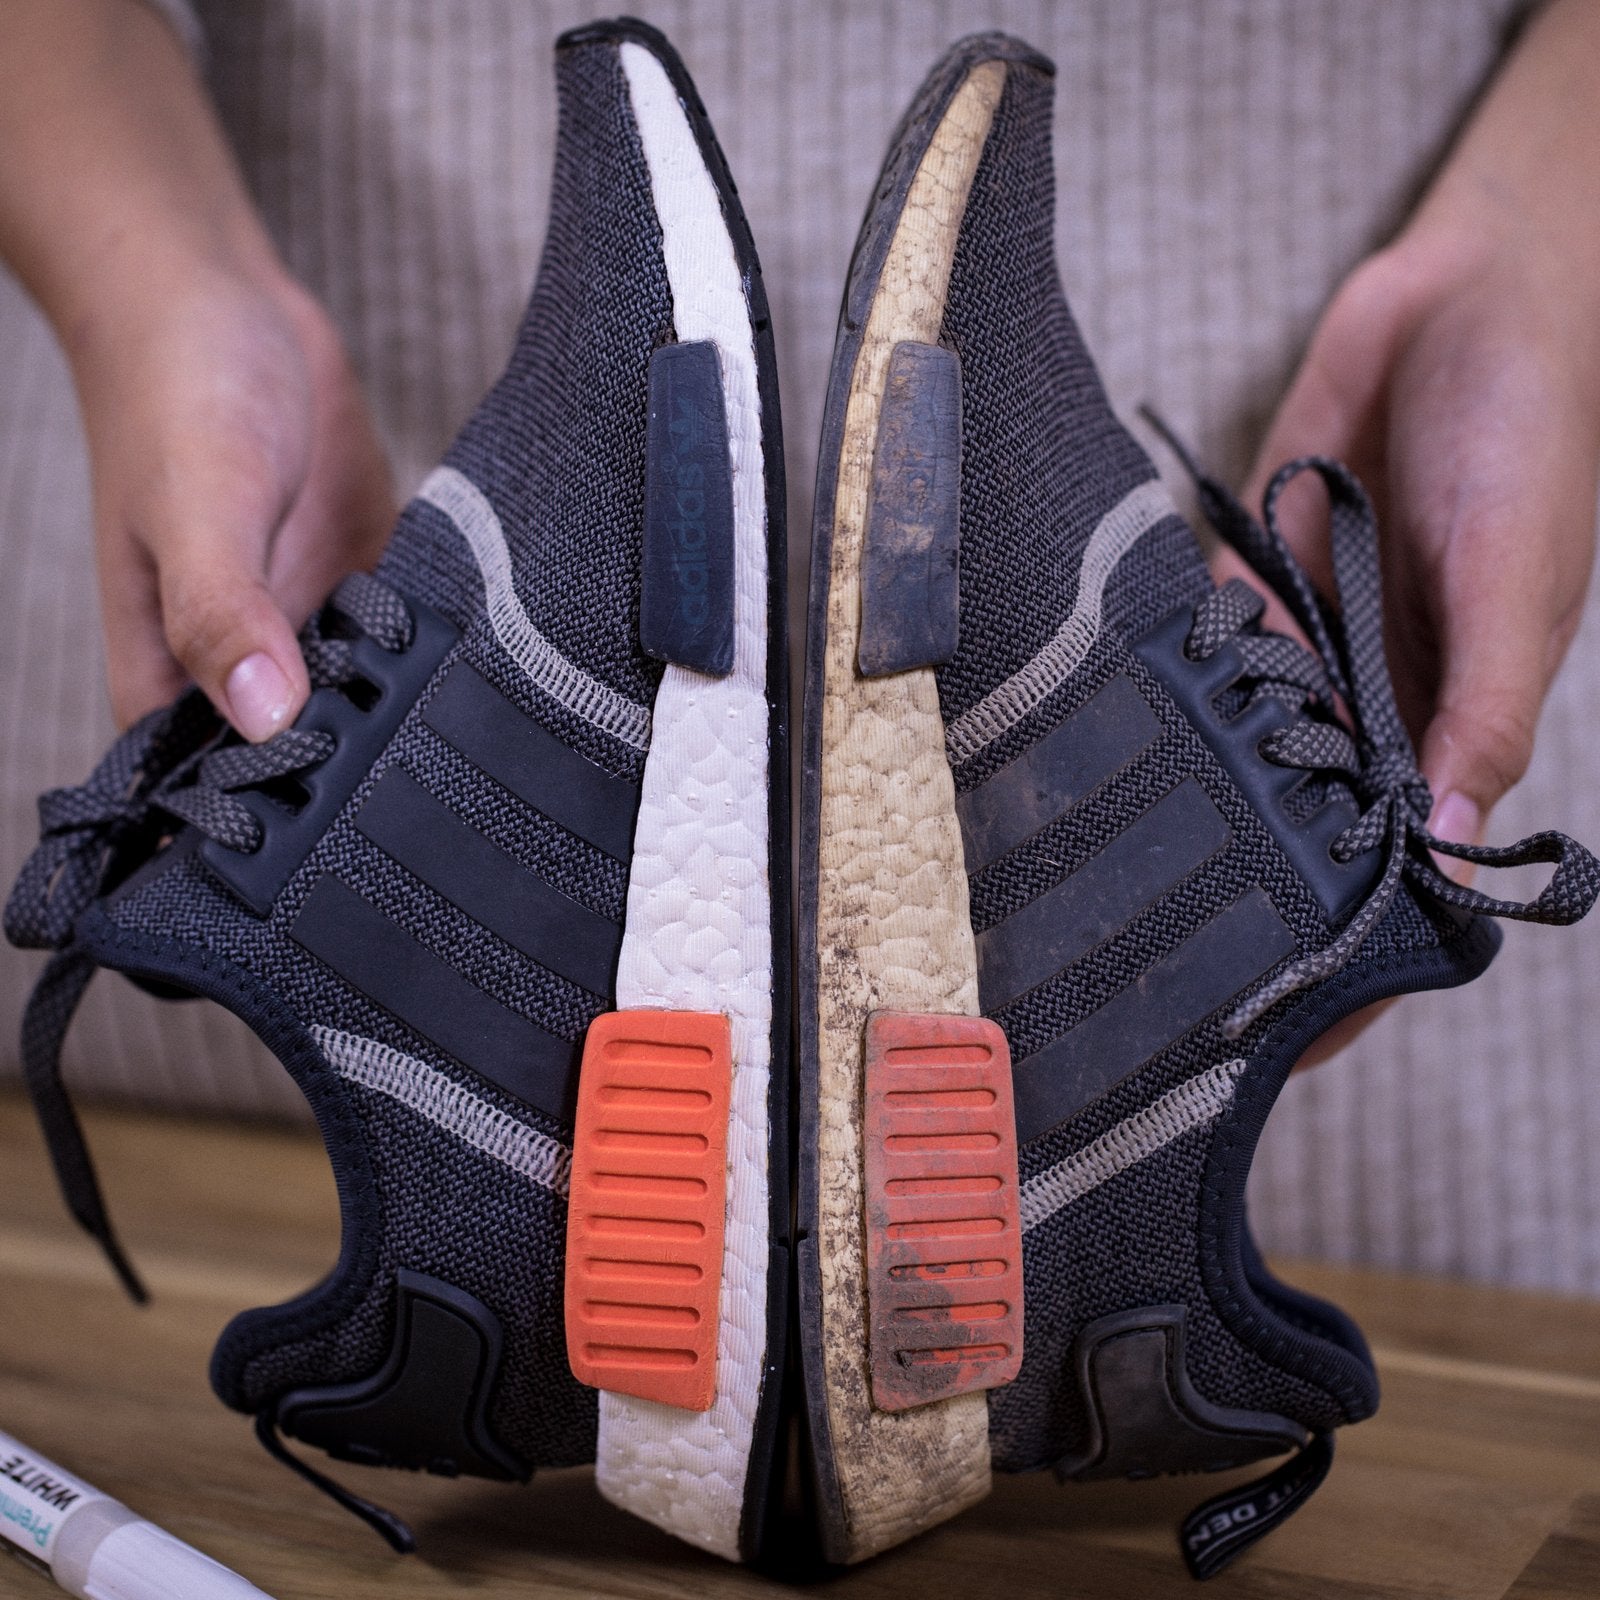 REVIEW] How to restore NMD, Ultra Boost 